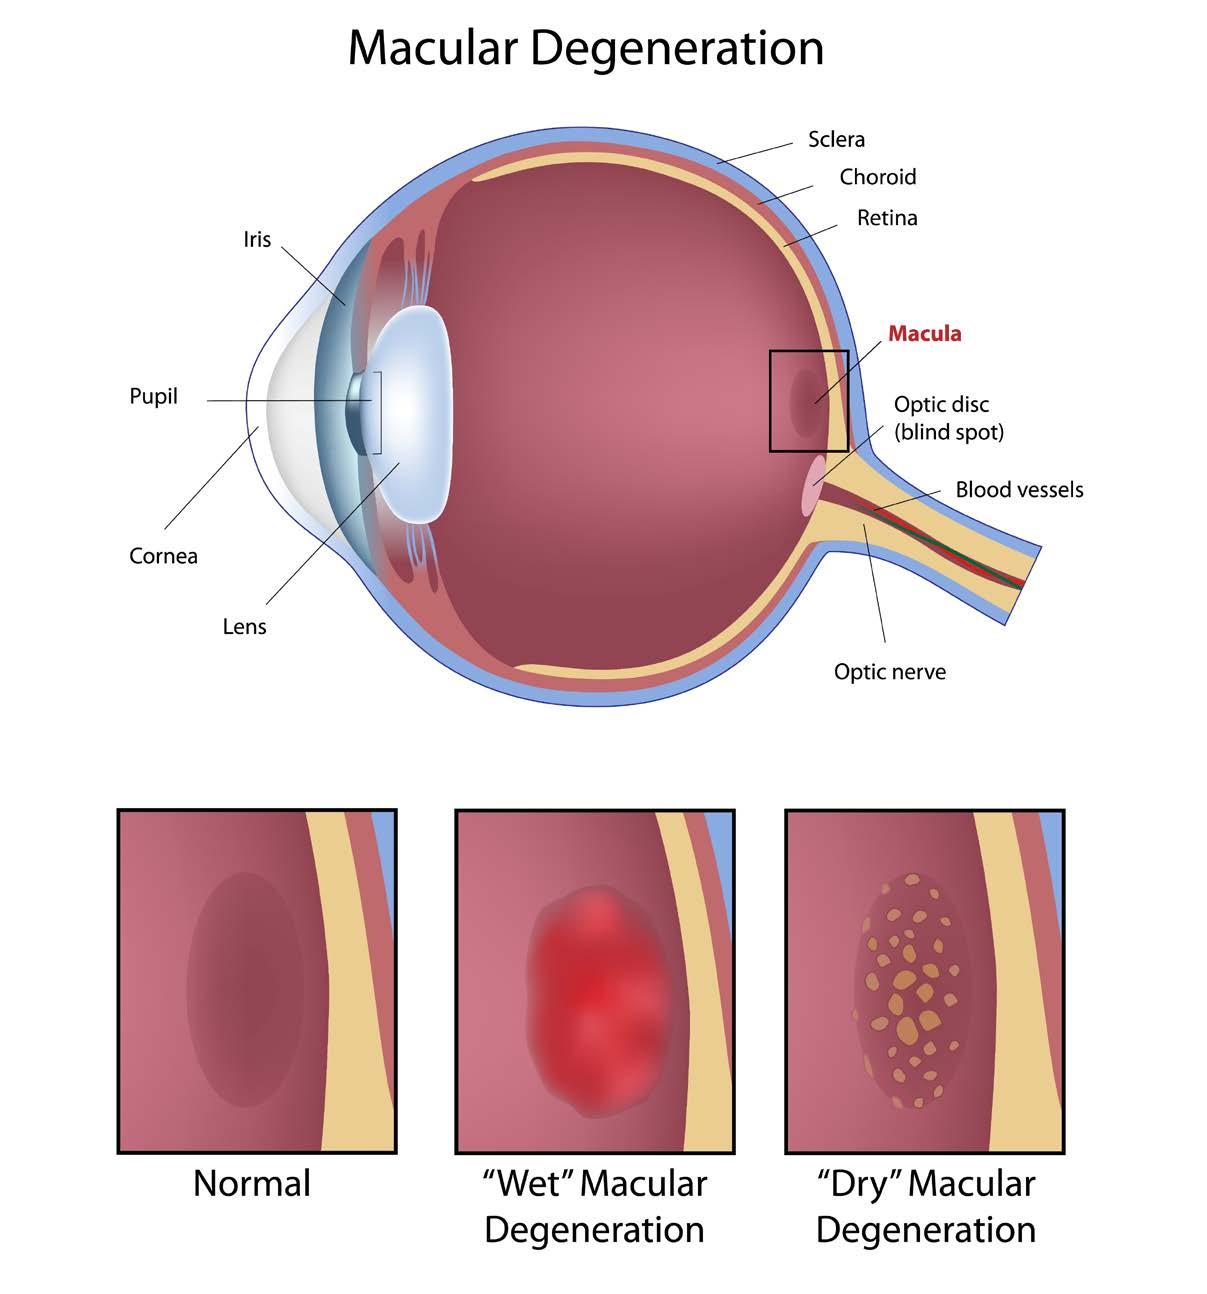 A diagram that portrays a comparison between the wet and dry forms of macular degeneration as seen through the human eye.